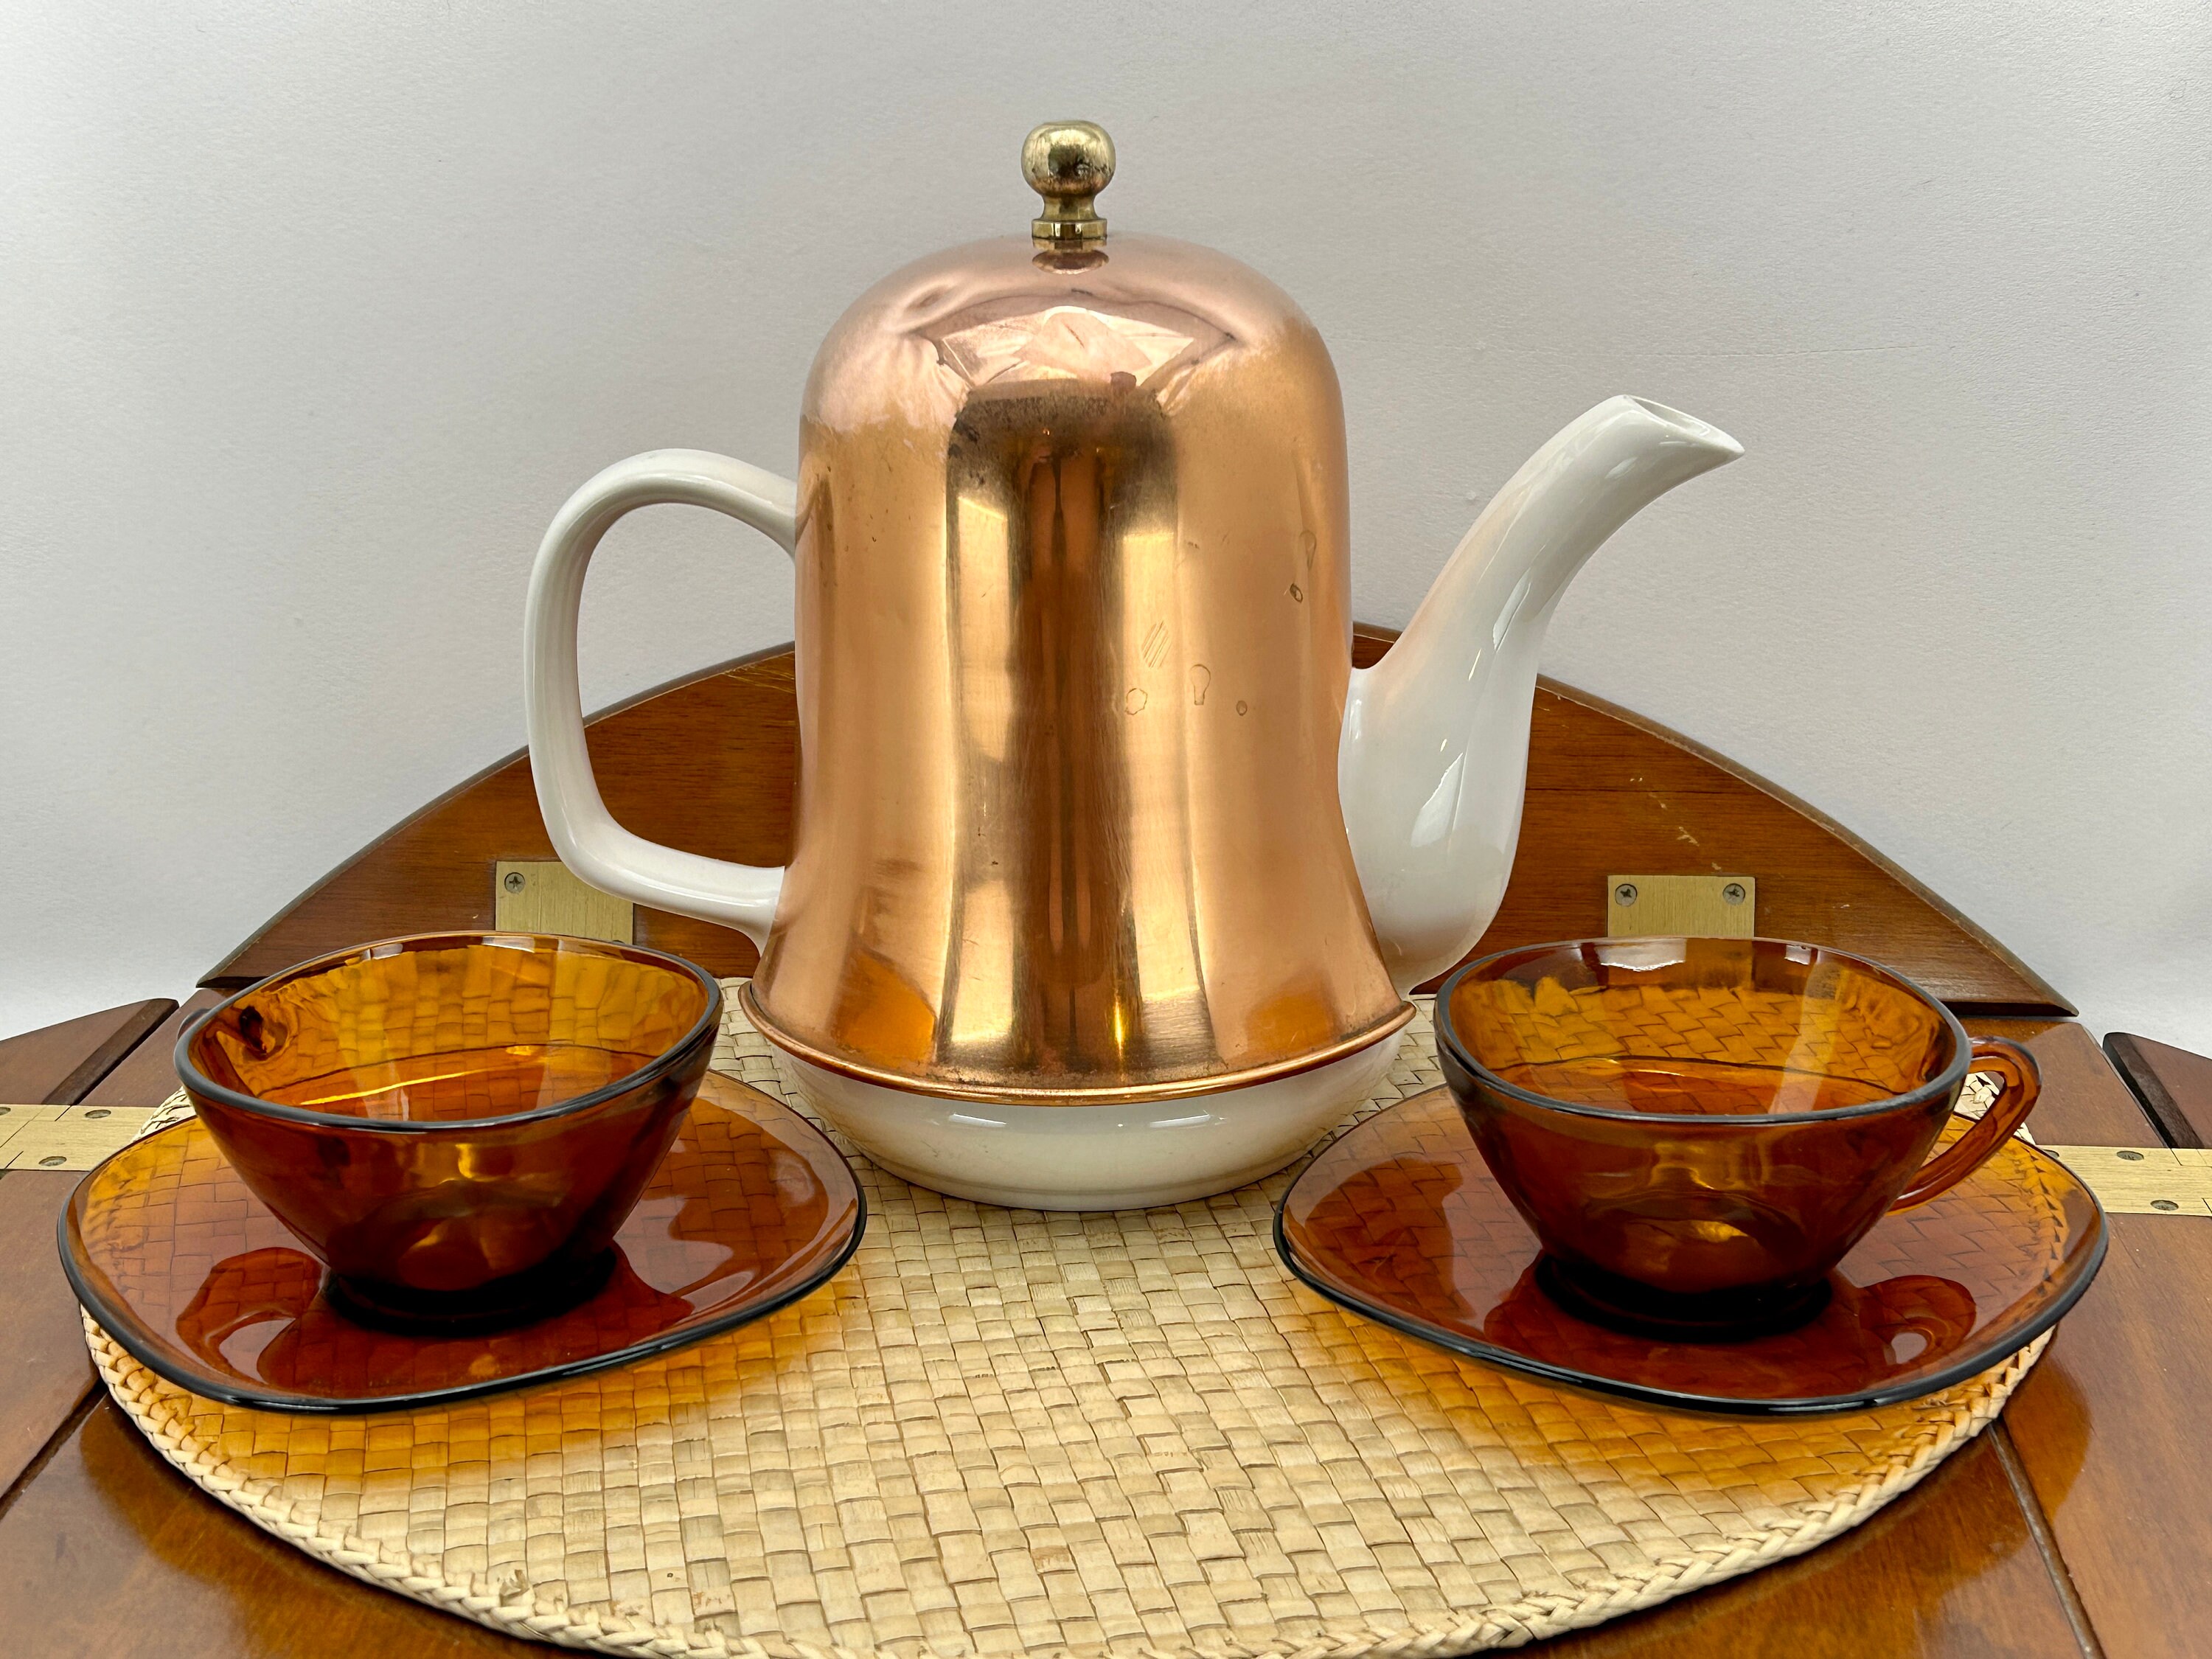 Copper Rose Glass Teapot with Tealight Warmer – Plum Deluxe Tea